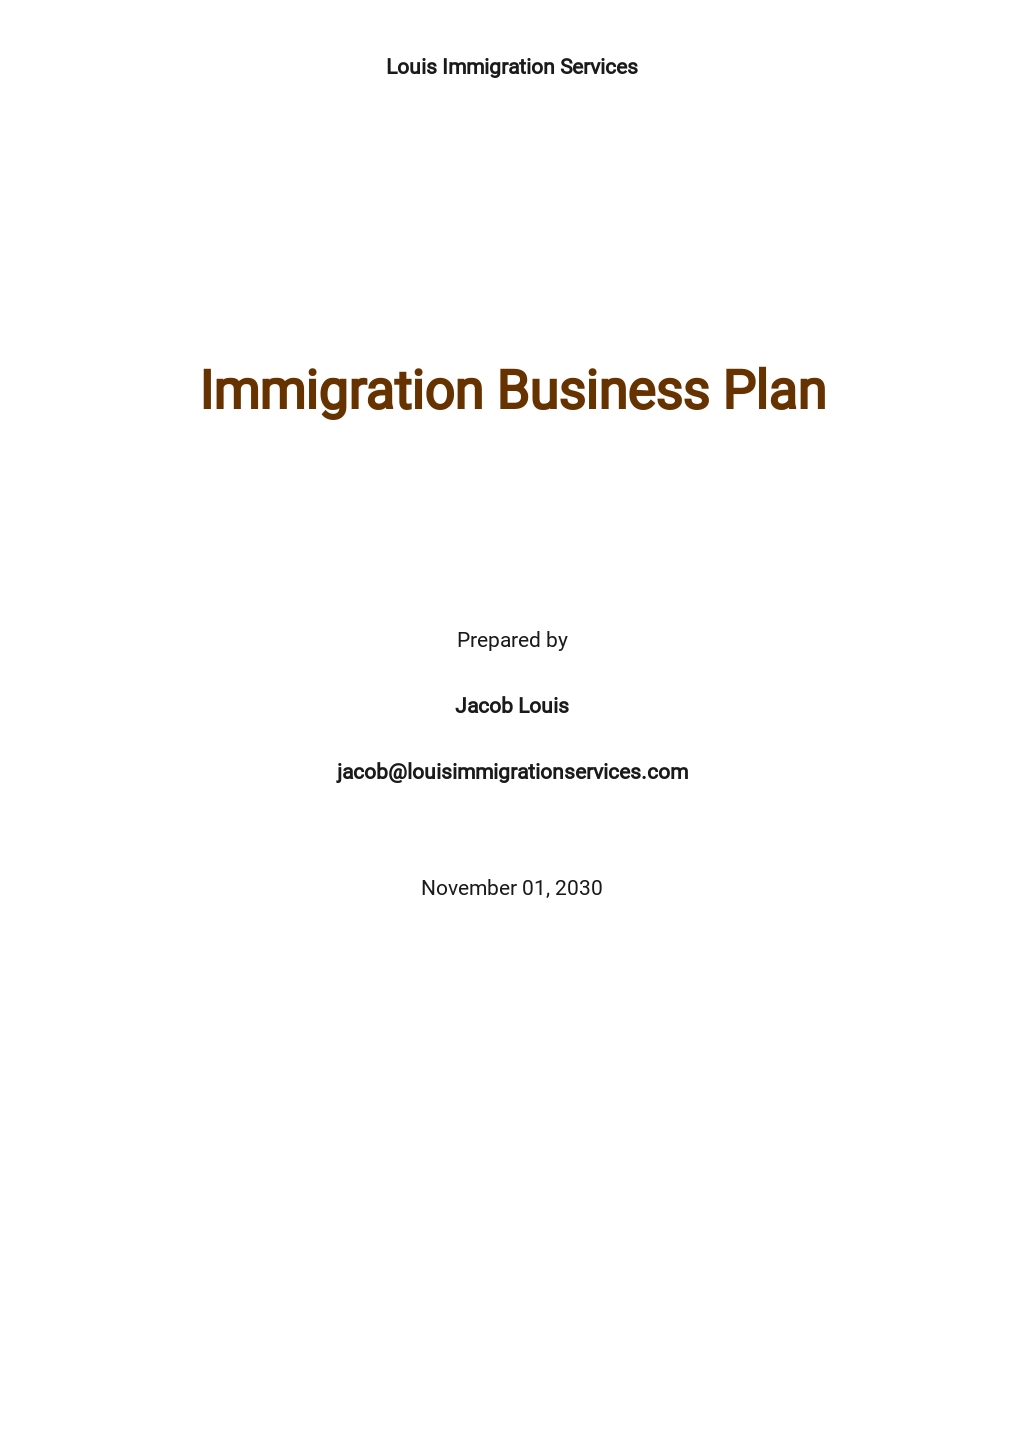 Immigration Business Plan Template.jpe